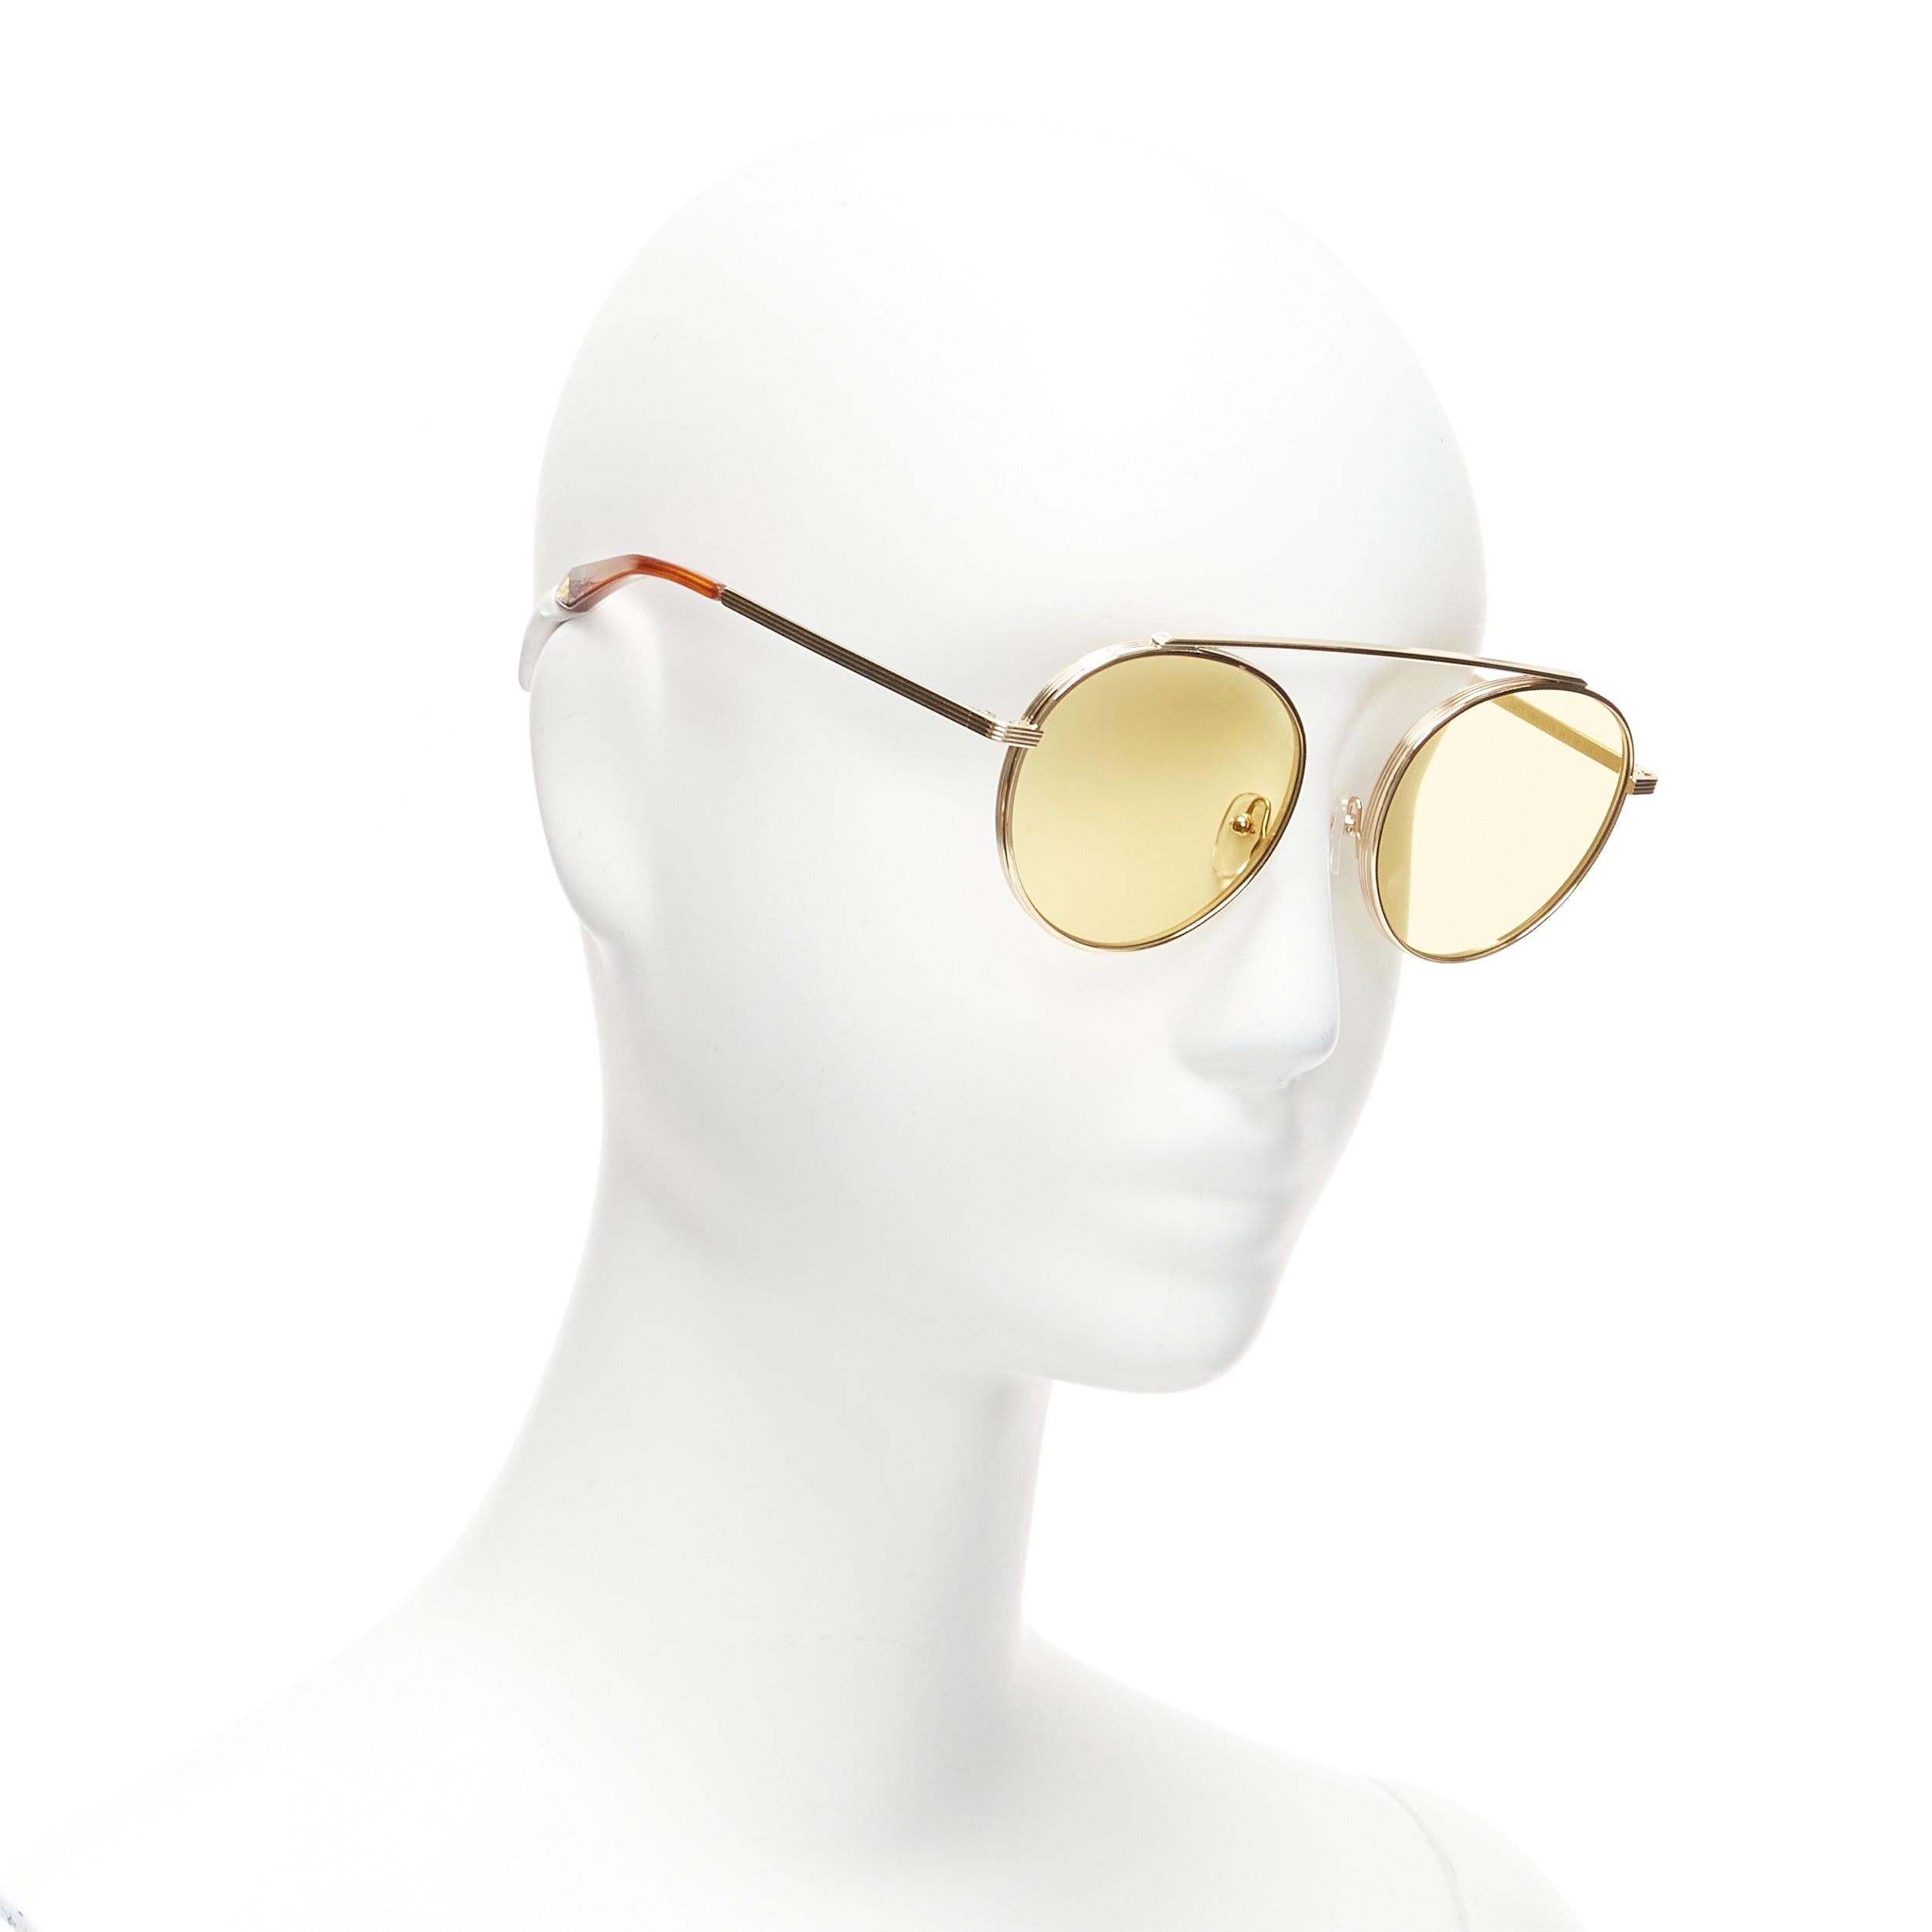 VICTORIA ECKHAM Cati VBS137 gold round frame yellow lens sunglasses
Reference: NKLL/A00085
Brand: Victoria Beckham
Model: Cati VBS137 V4 54 18 130
Material: Metal
Color: Gold, Yellow
Pattern: Solid
Made in: Italy

CONDITION:
Condition: Excellent,